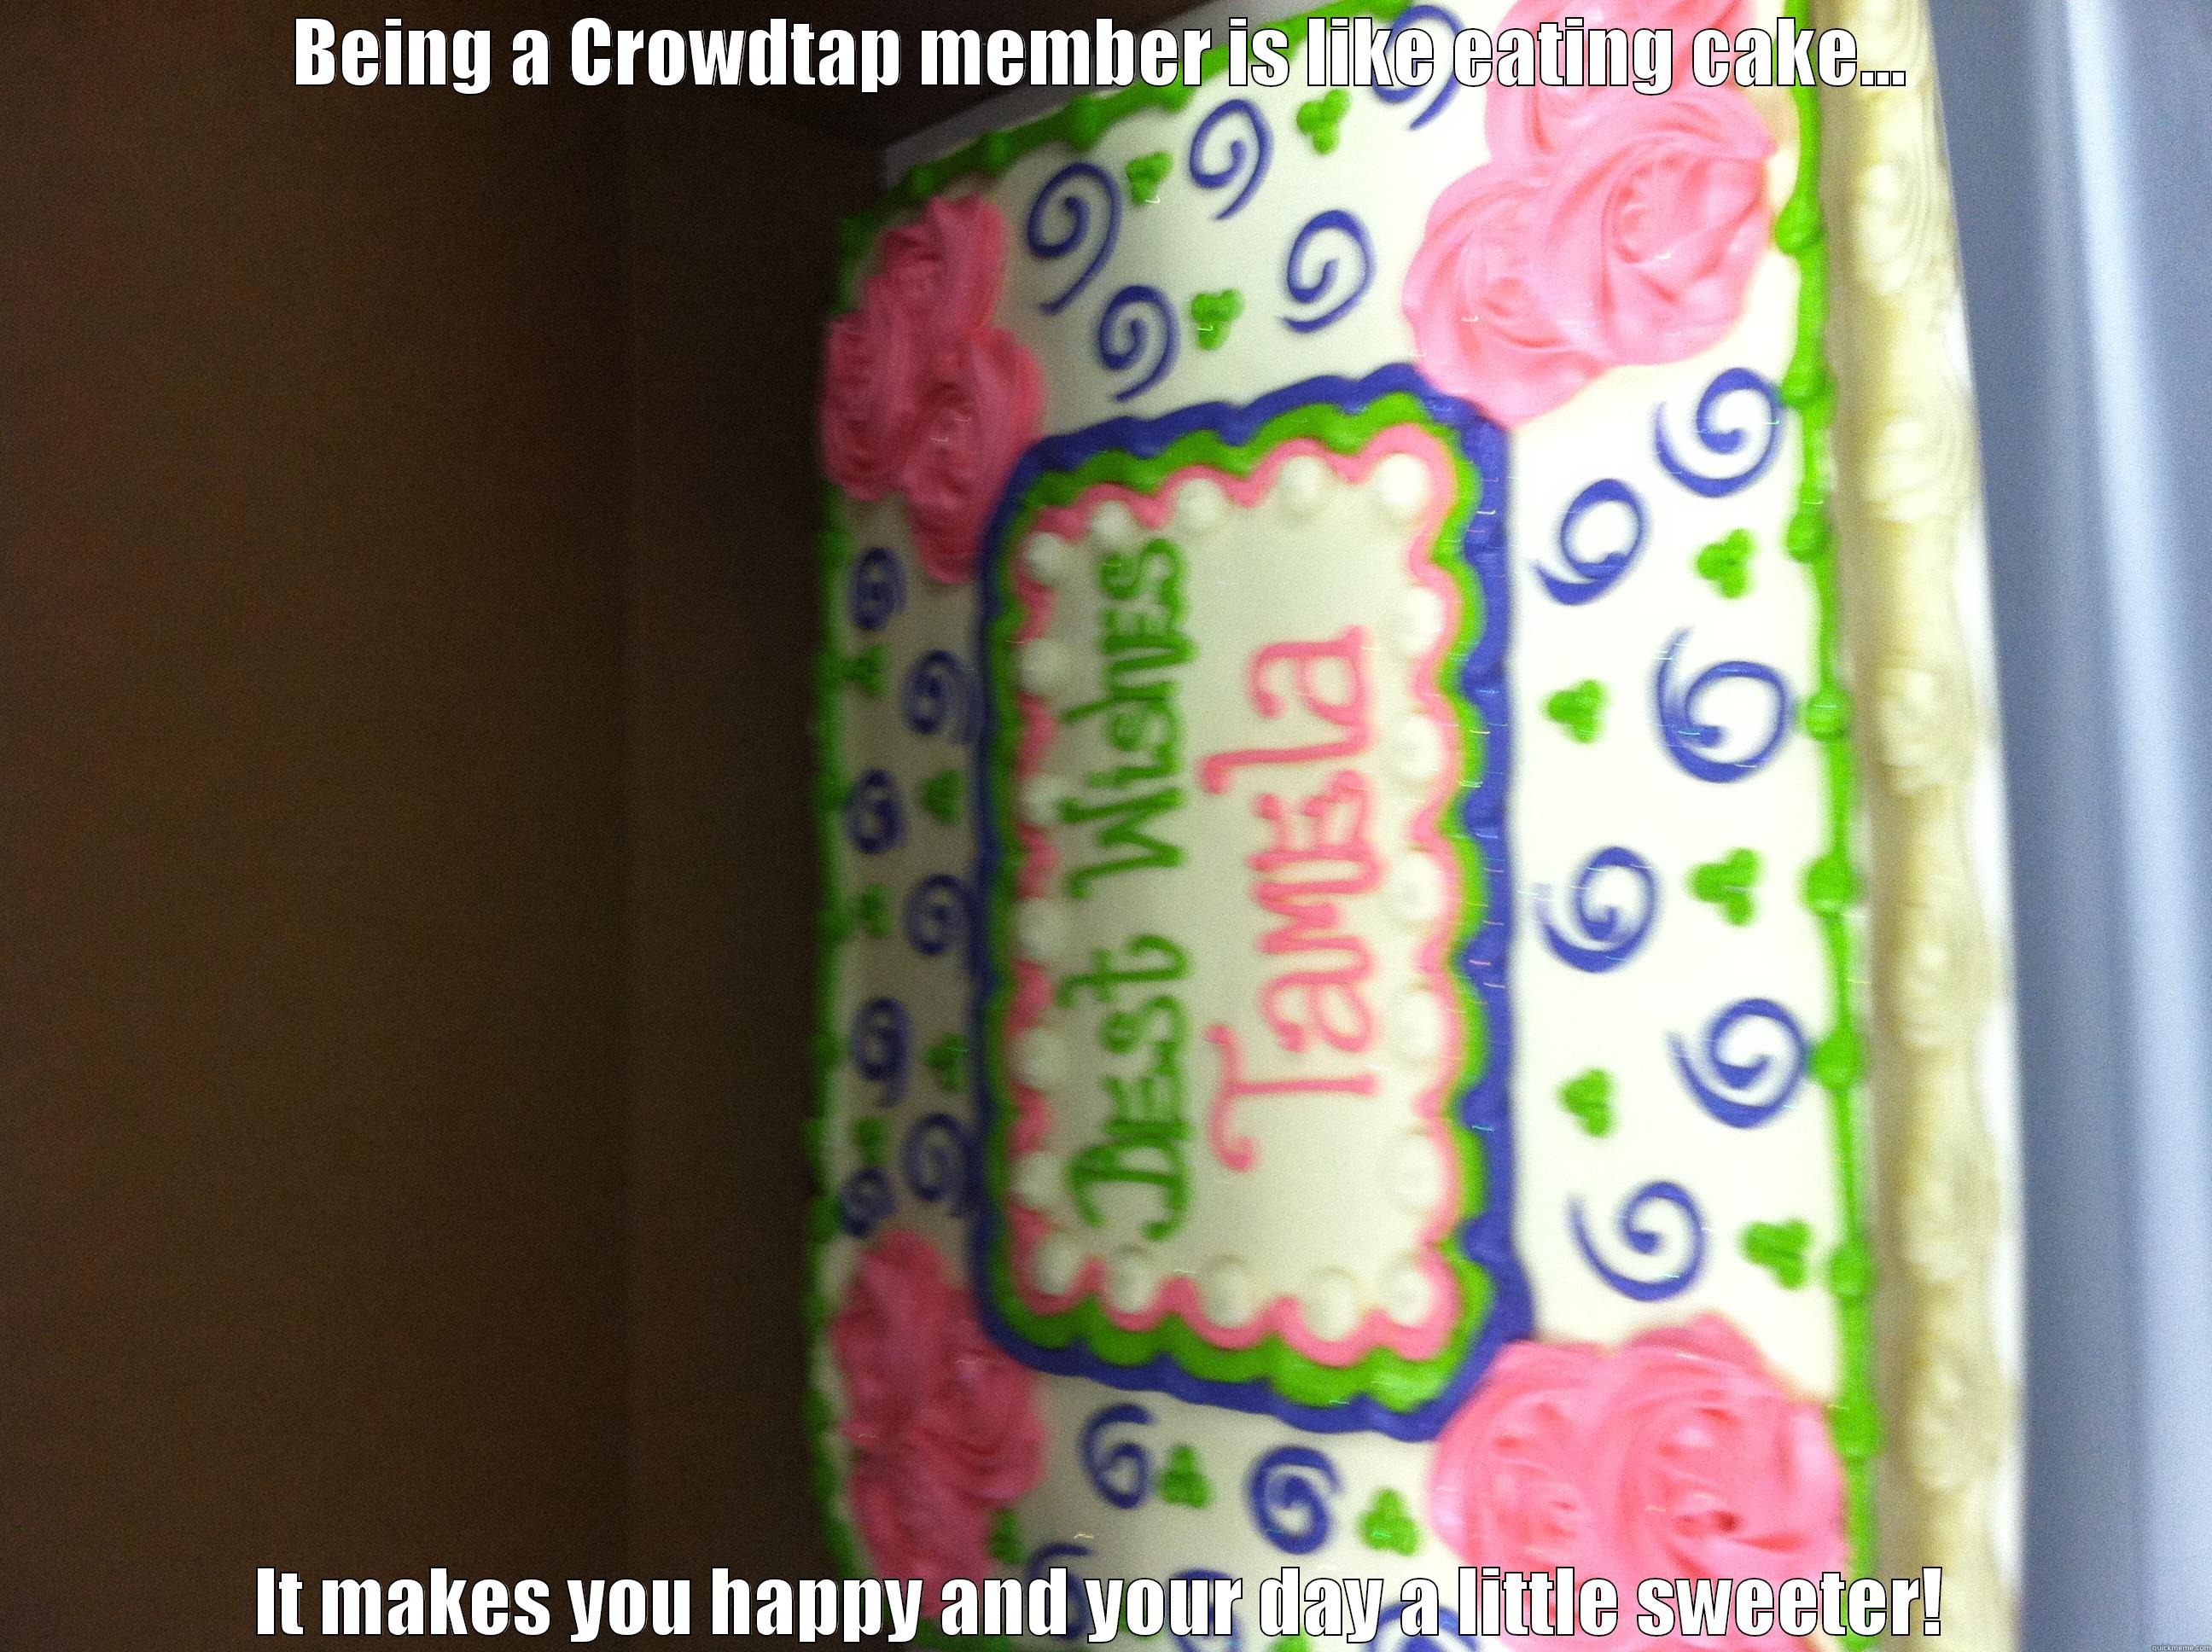 Why I love Crowdtap - BEING A CROWDTAP MEMBER IS LIKE EATING CAKE... IT MAKES YOU HAPPY AND YOUR DAY A LITTLE SWEETER! Misc